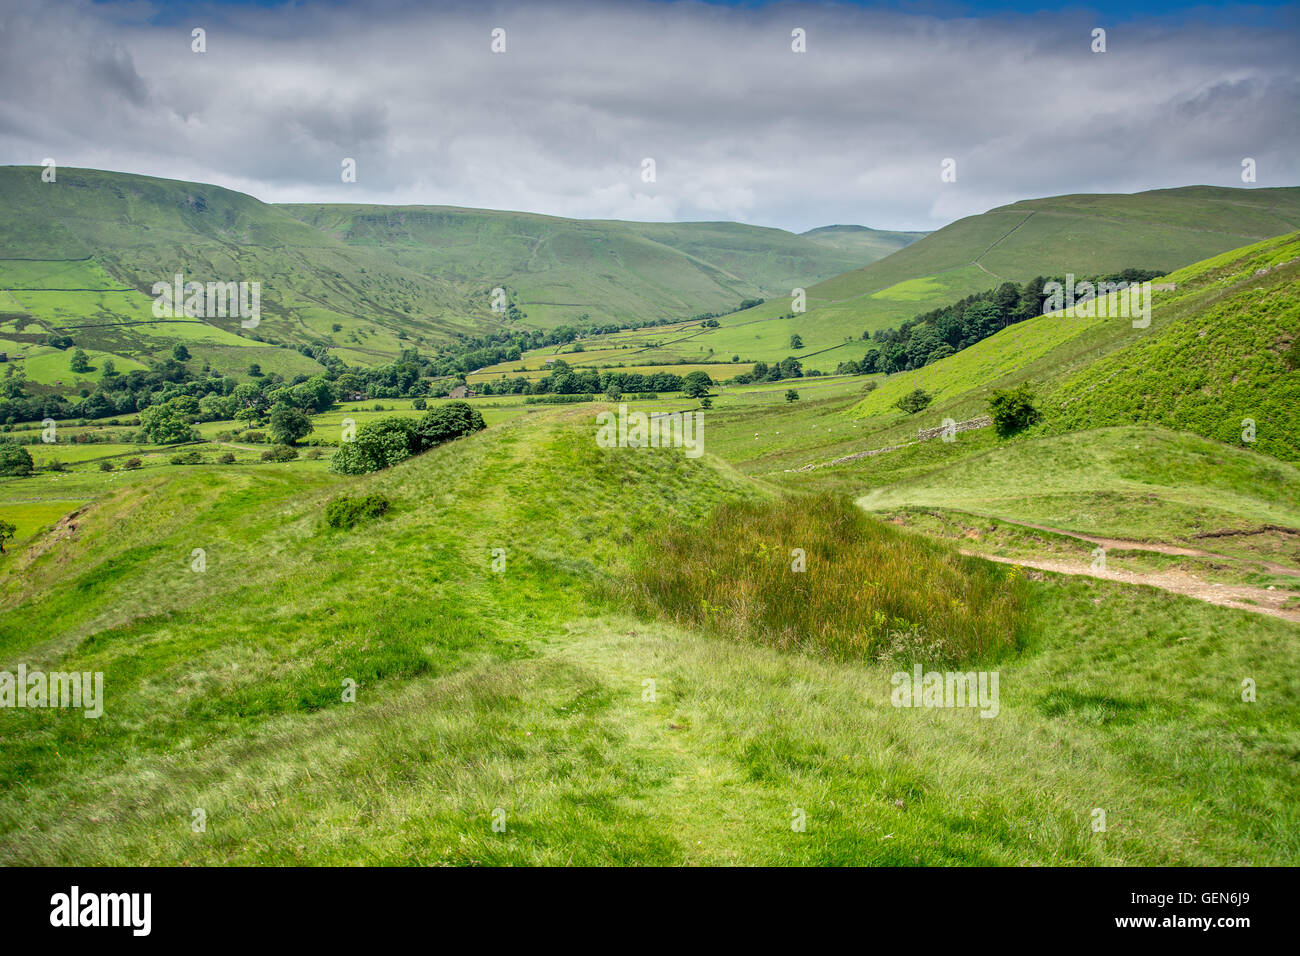 Parco nazionale di ,edale hope valley Inghilterra Foto Stock